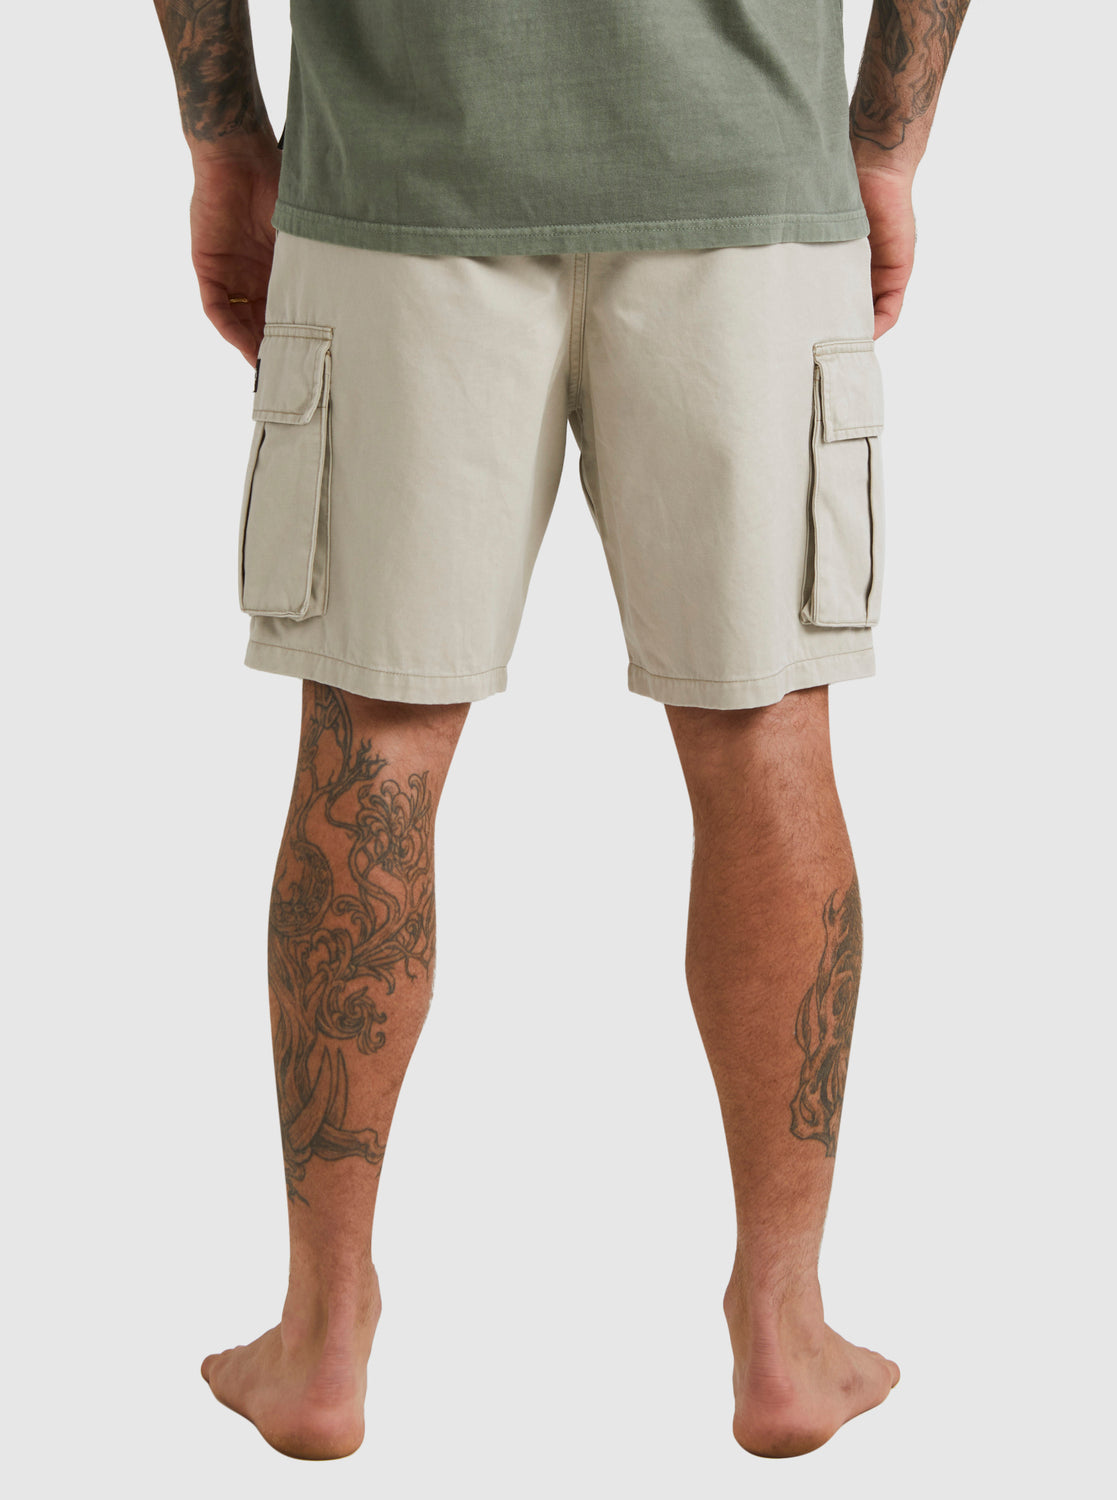 Quiksilver Mikey Cargo Shorts in goat colourway from back